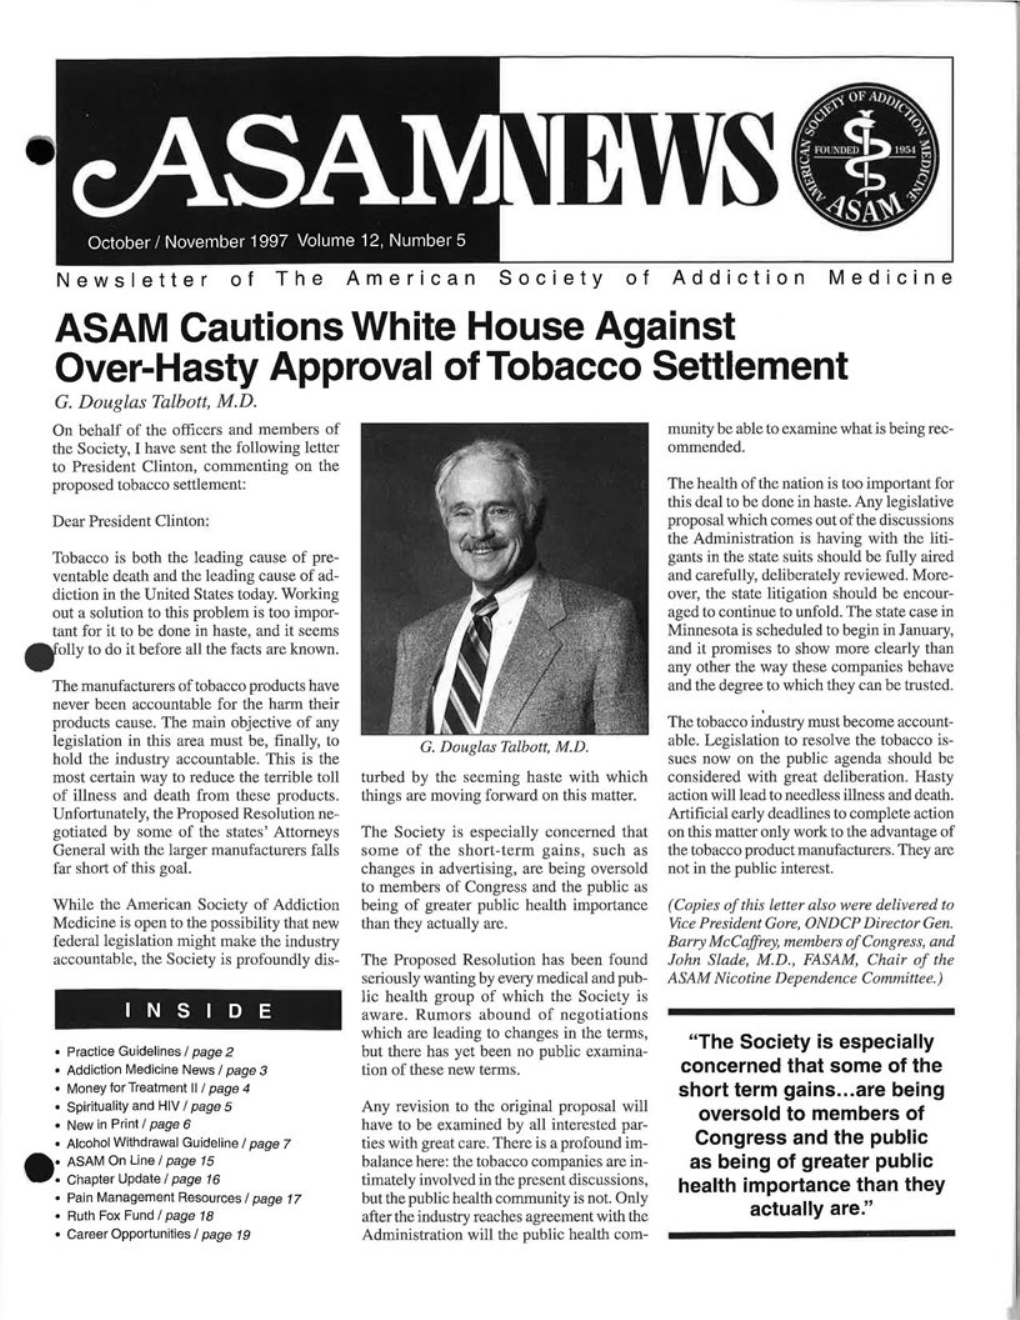 ASAM Cautions White House Against Over-Hasty Approval of Tobacco Settlement G